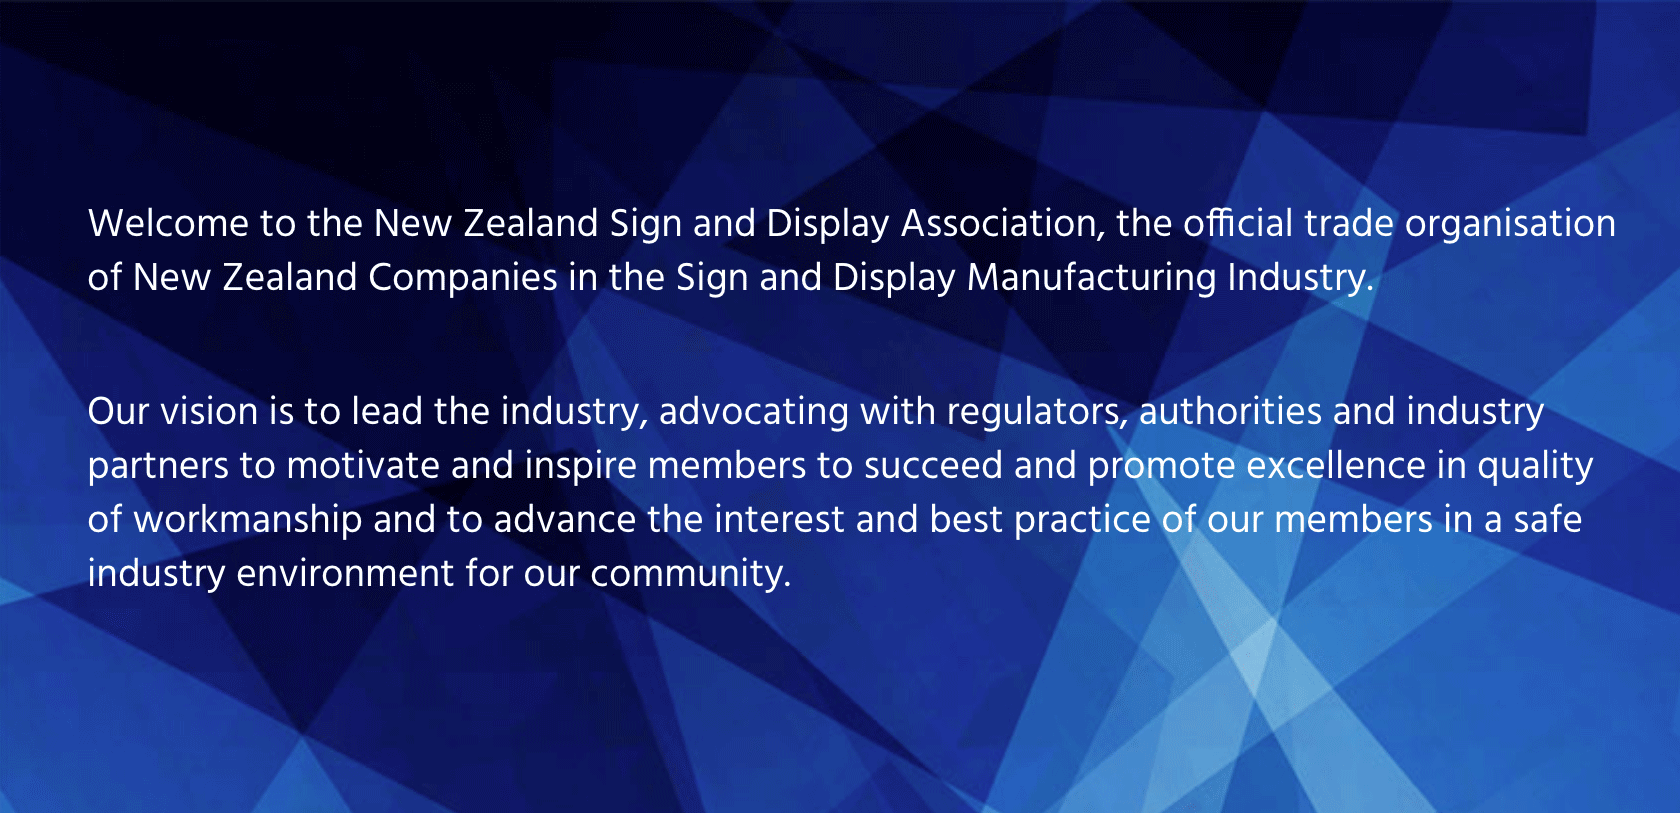 New Zealand Sign and Display Association